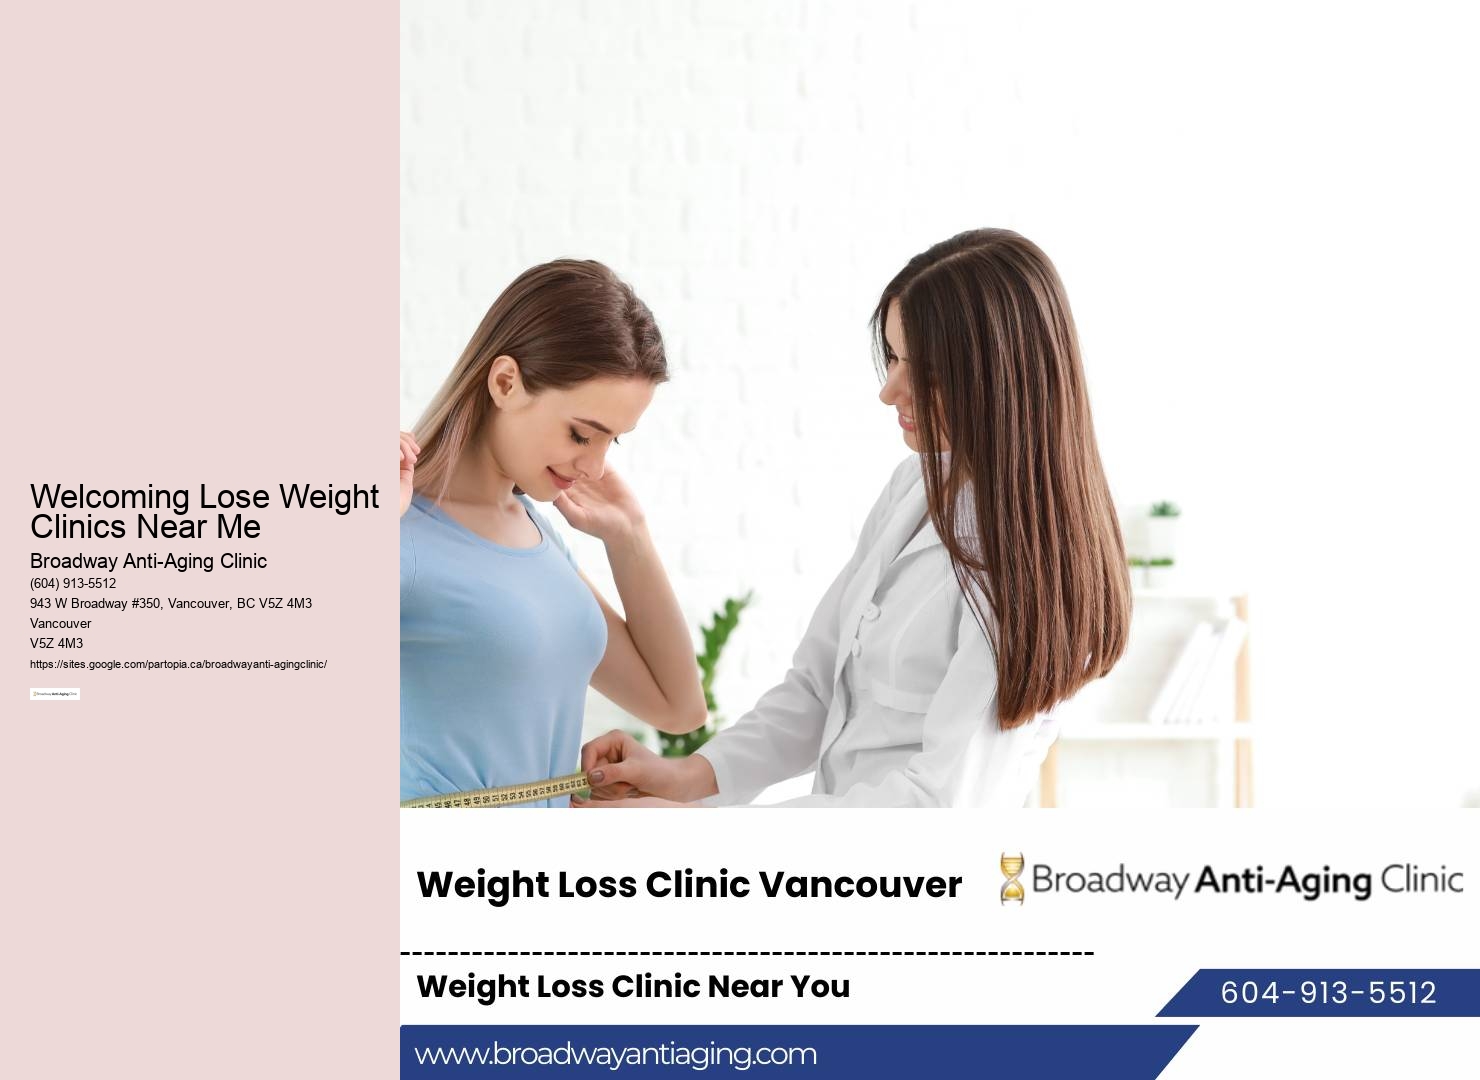 Top-rated Weight Loss Clinic Vancouver